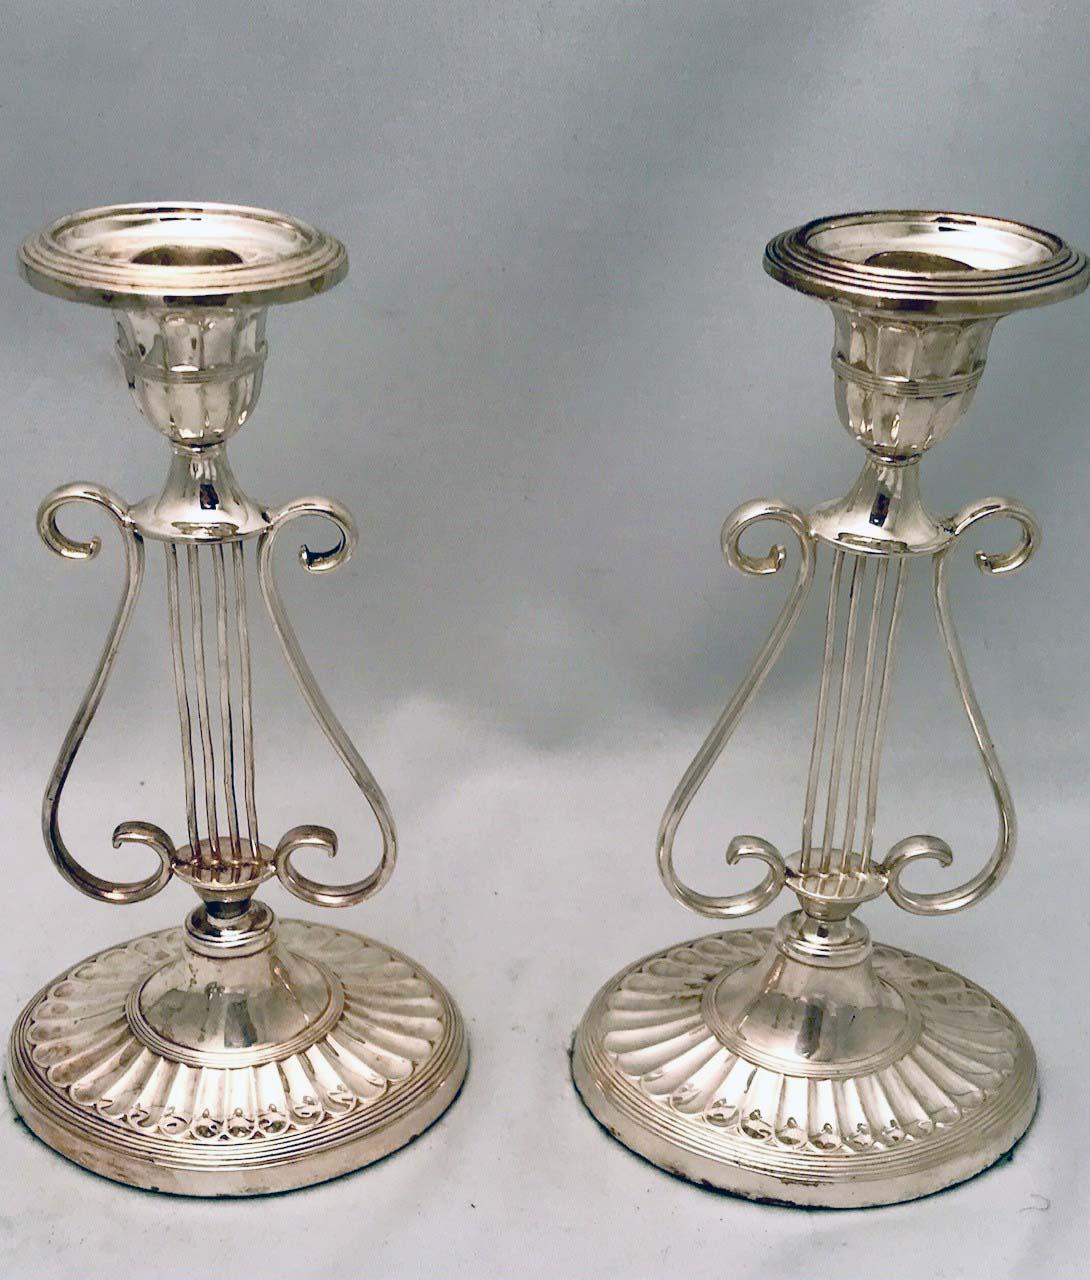 These are on weighted scalloped oval bases, rising to a lyre-shaped stem supporting  oval candle.-cups. It is unusual to find a set of four in such good    condition.
They would grace any table, particularly that of musicians or those who like the